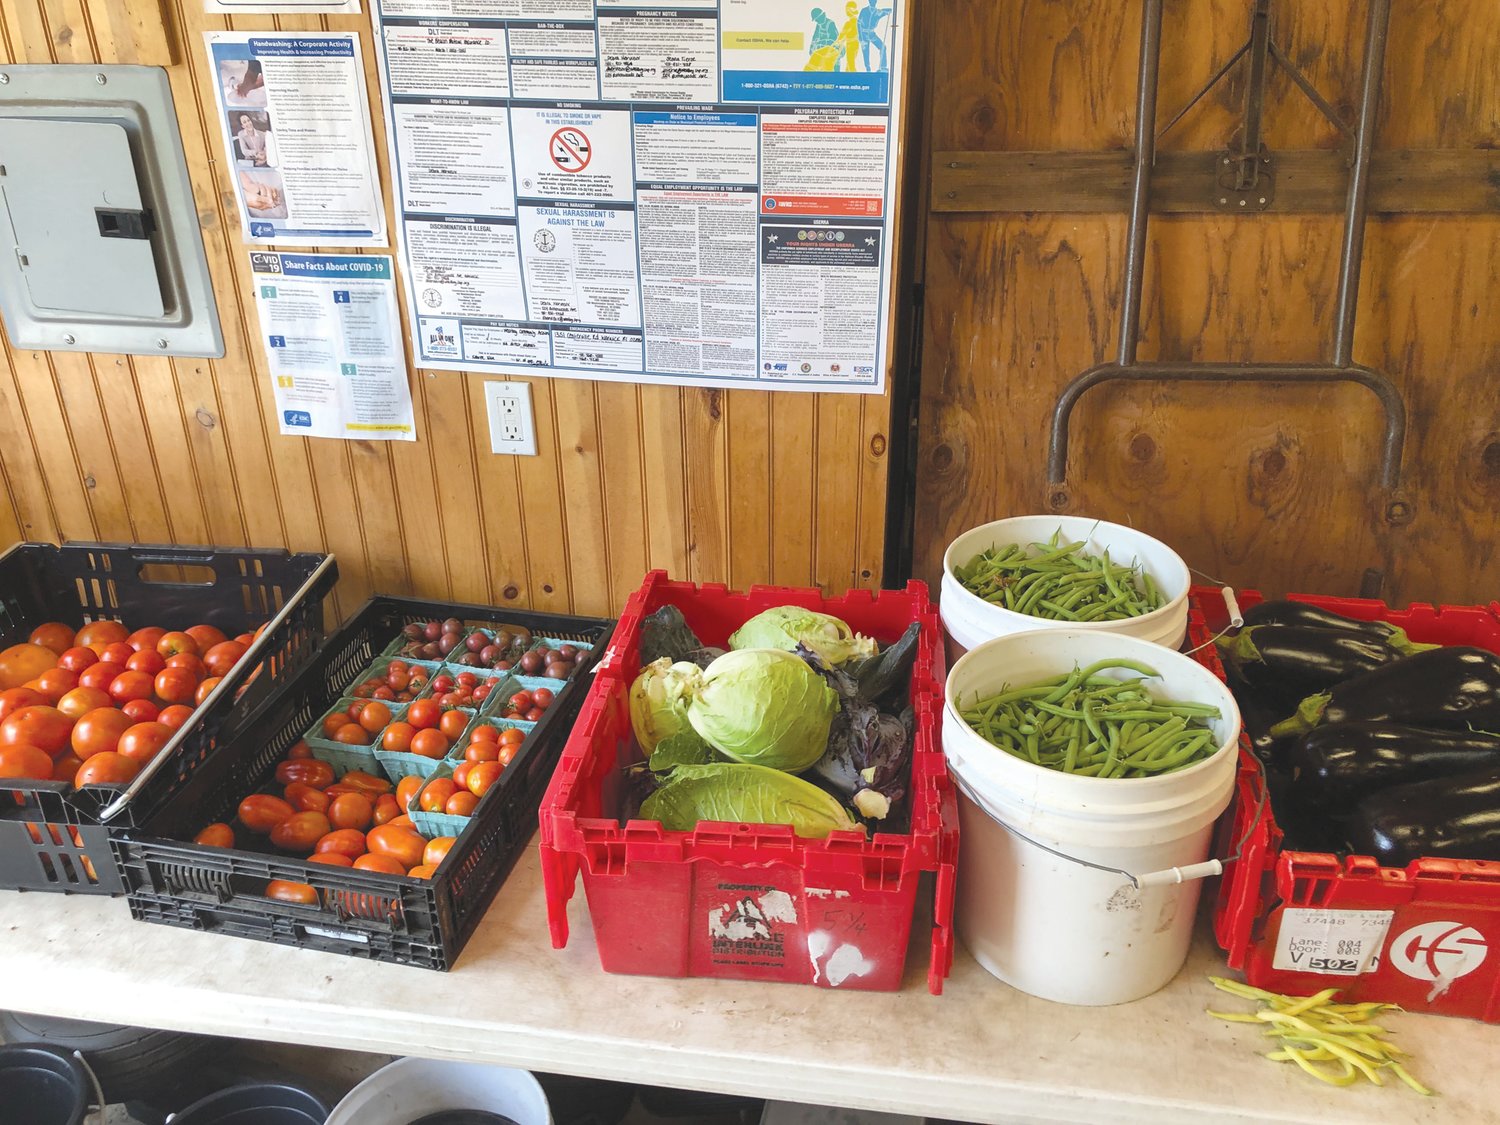 PICKED WITH CARE: Tomatoes, cabbage, green beans and eggplant were picked by dedicated volunteers.